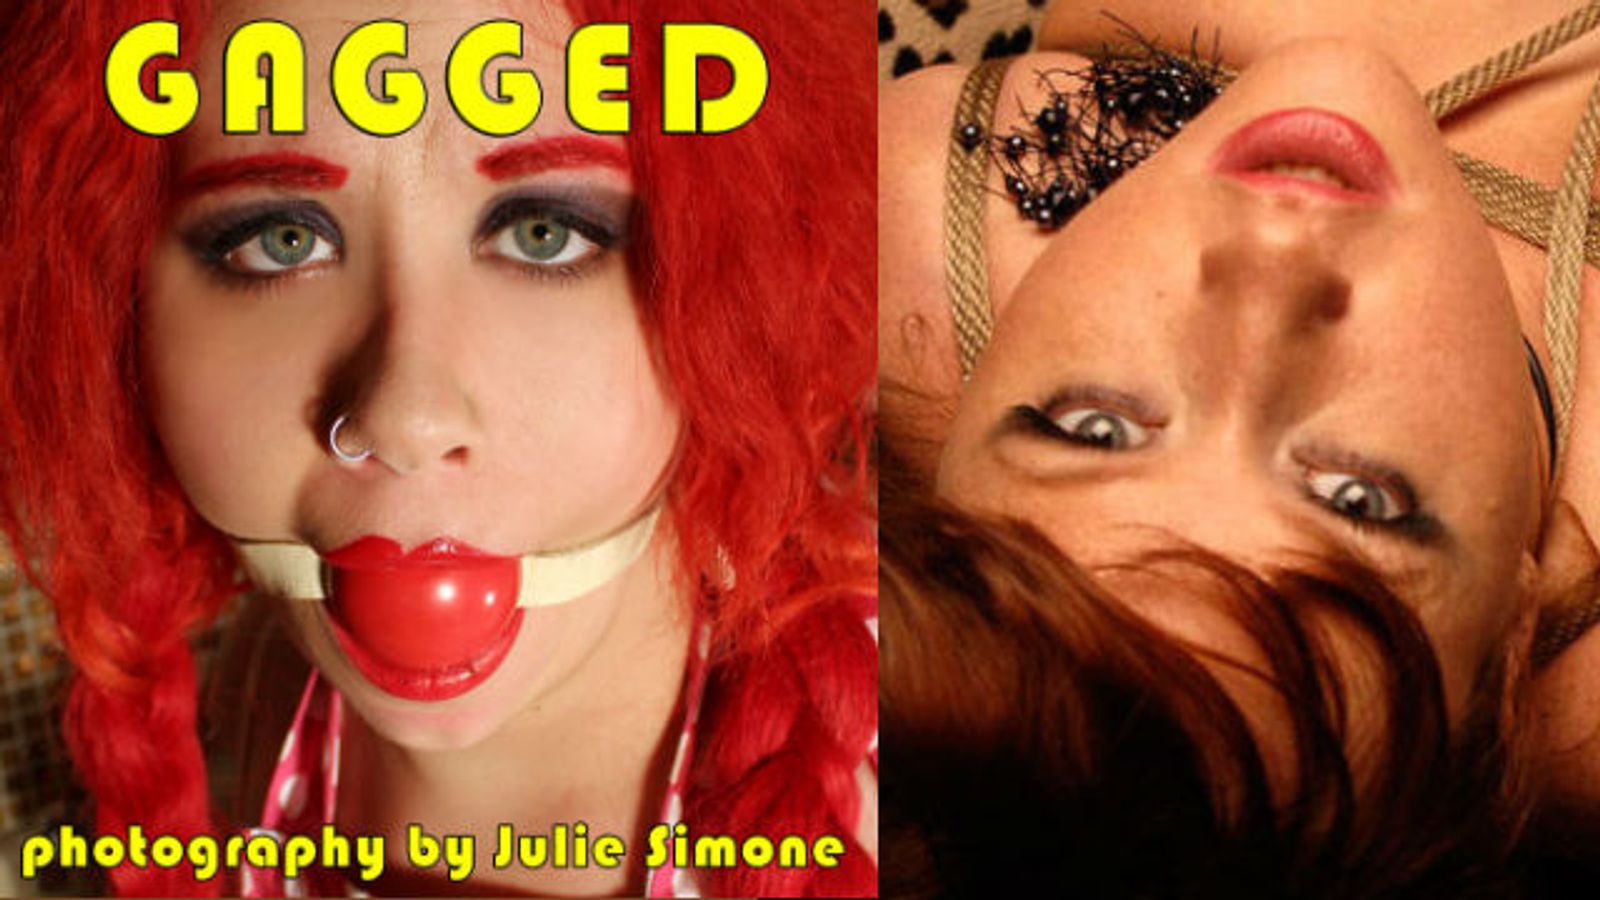 Julie Simone Starts Indiegogo Campaign For Her Book, 'Gagged'